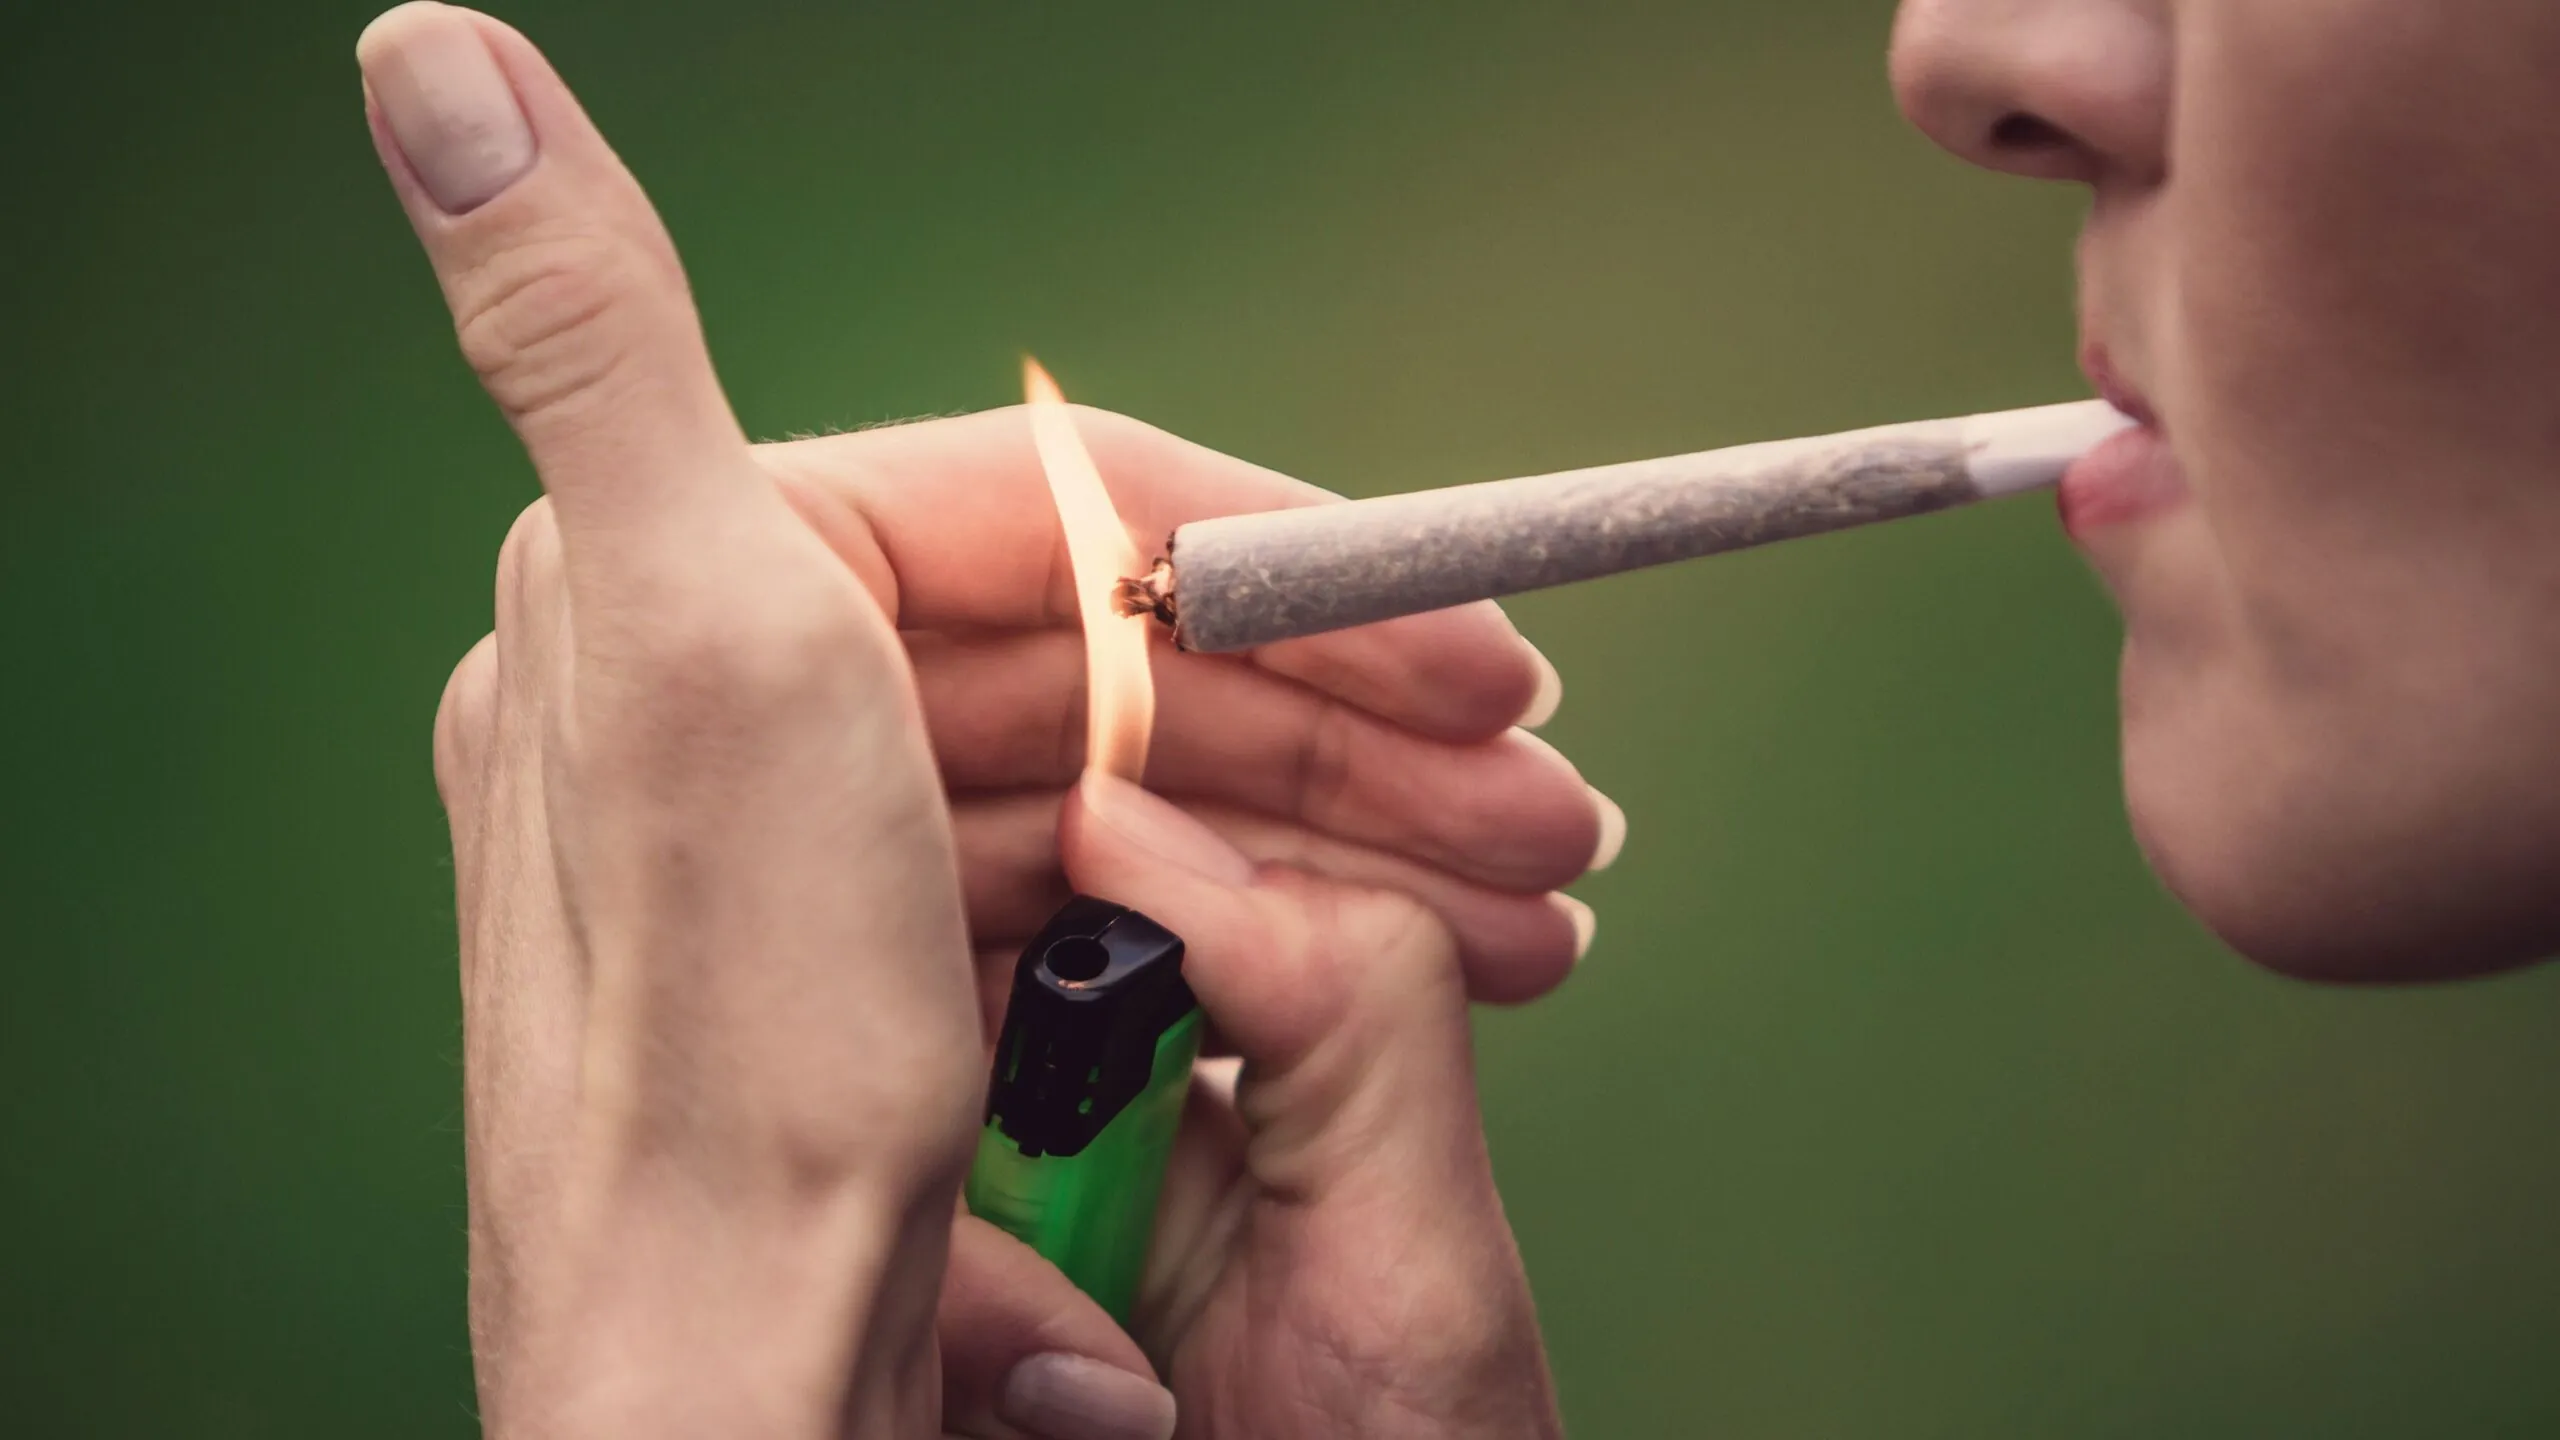 Fairfax County, Virginia, has emerged as a surprising leader in Weed consumption in the state